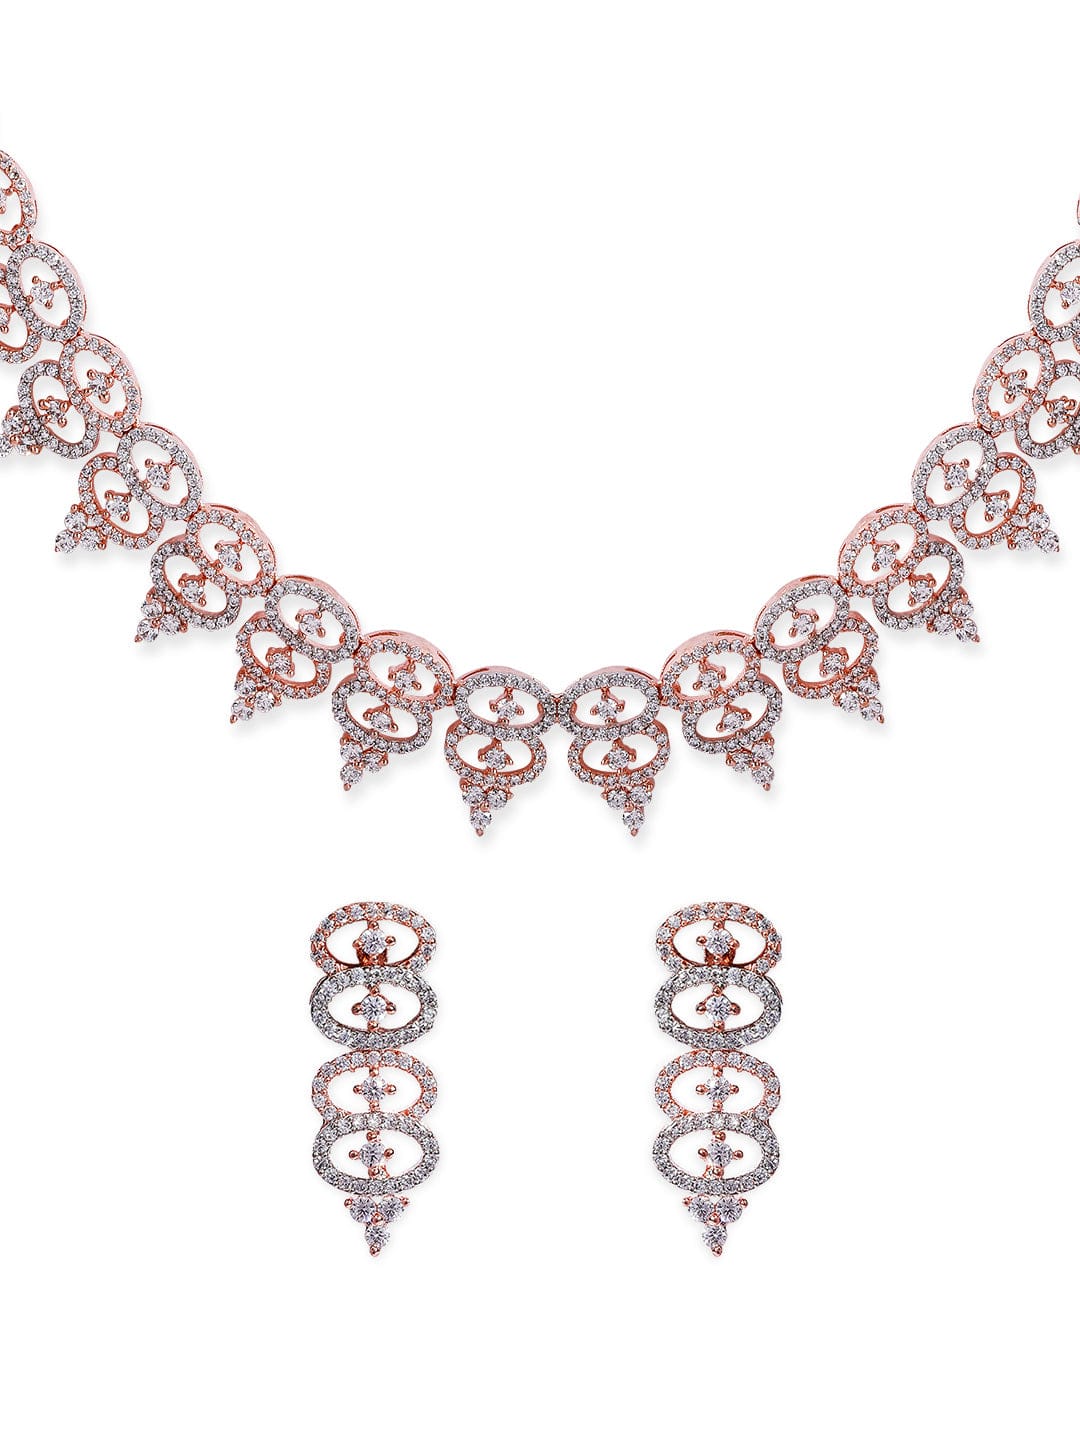 Rubans Rose Gold Plated Necklace Set With American Diamonds. Necklace Set